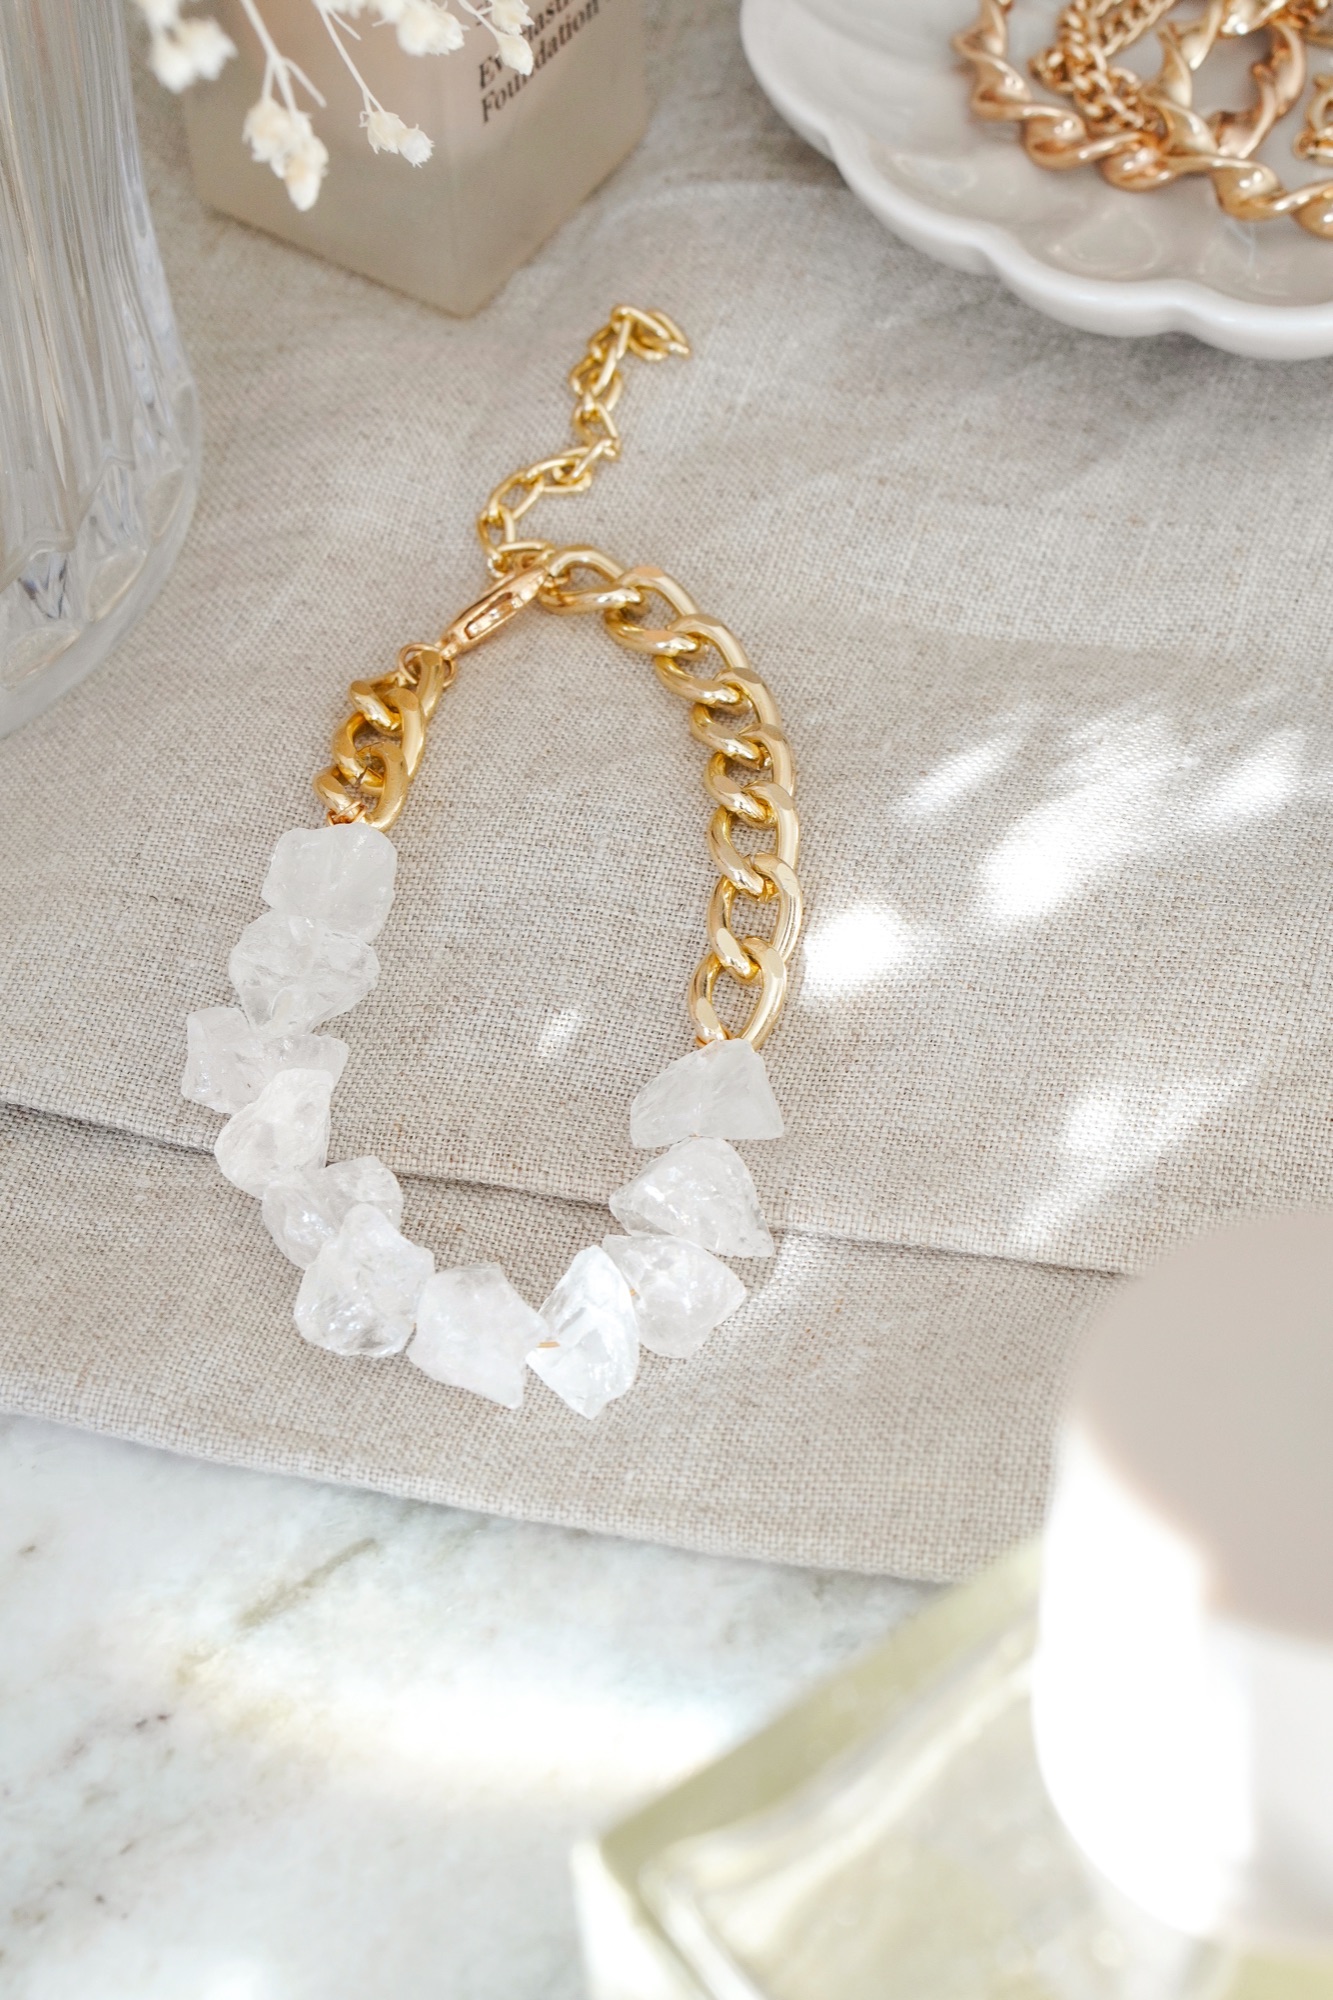 Gold Tone Curb Chain and Quartz Crystal Bracelet by Xander Kostroma